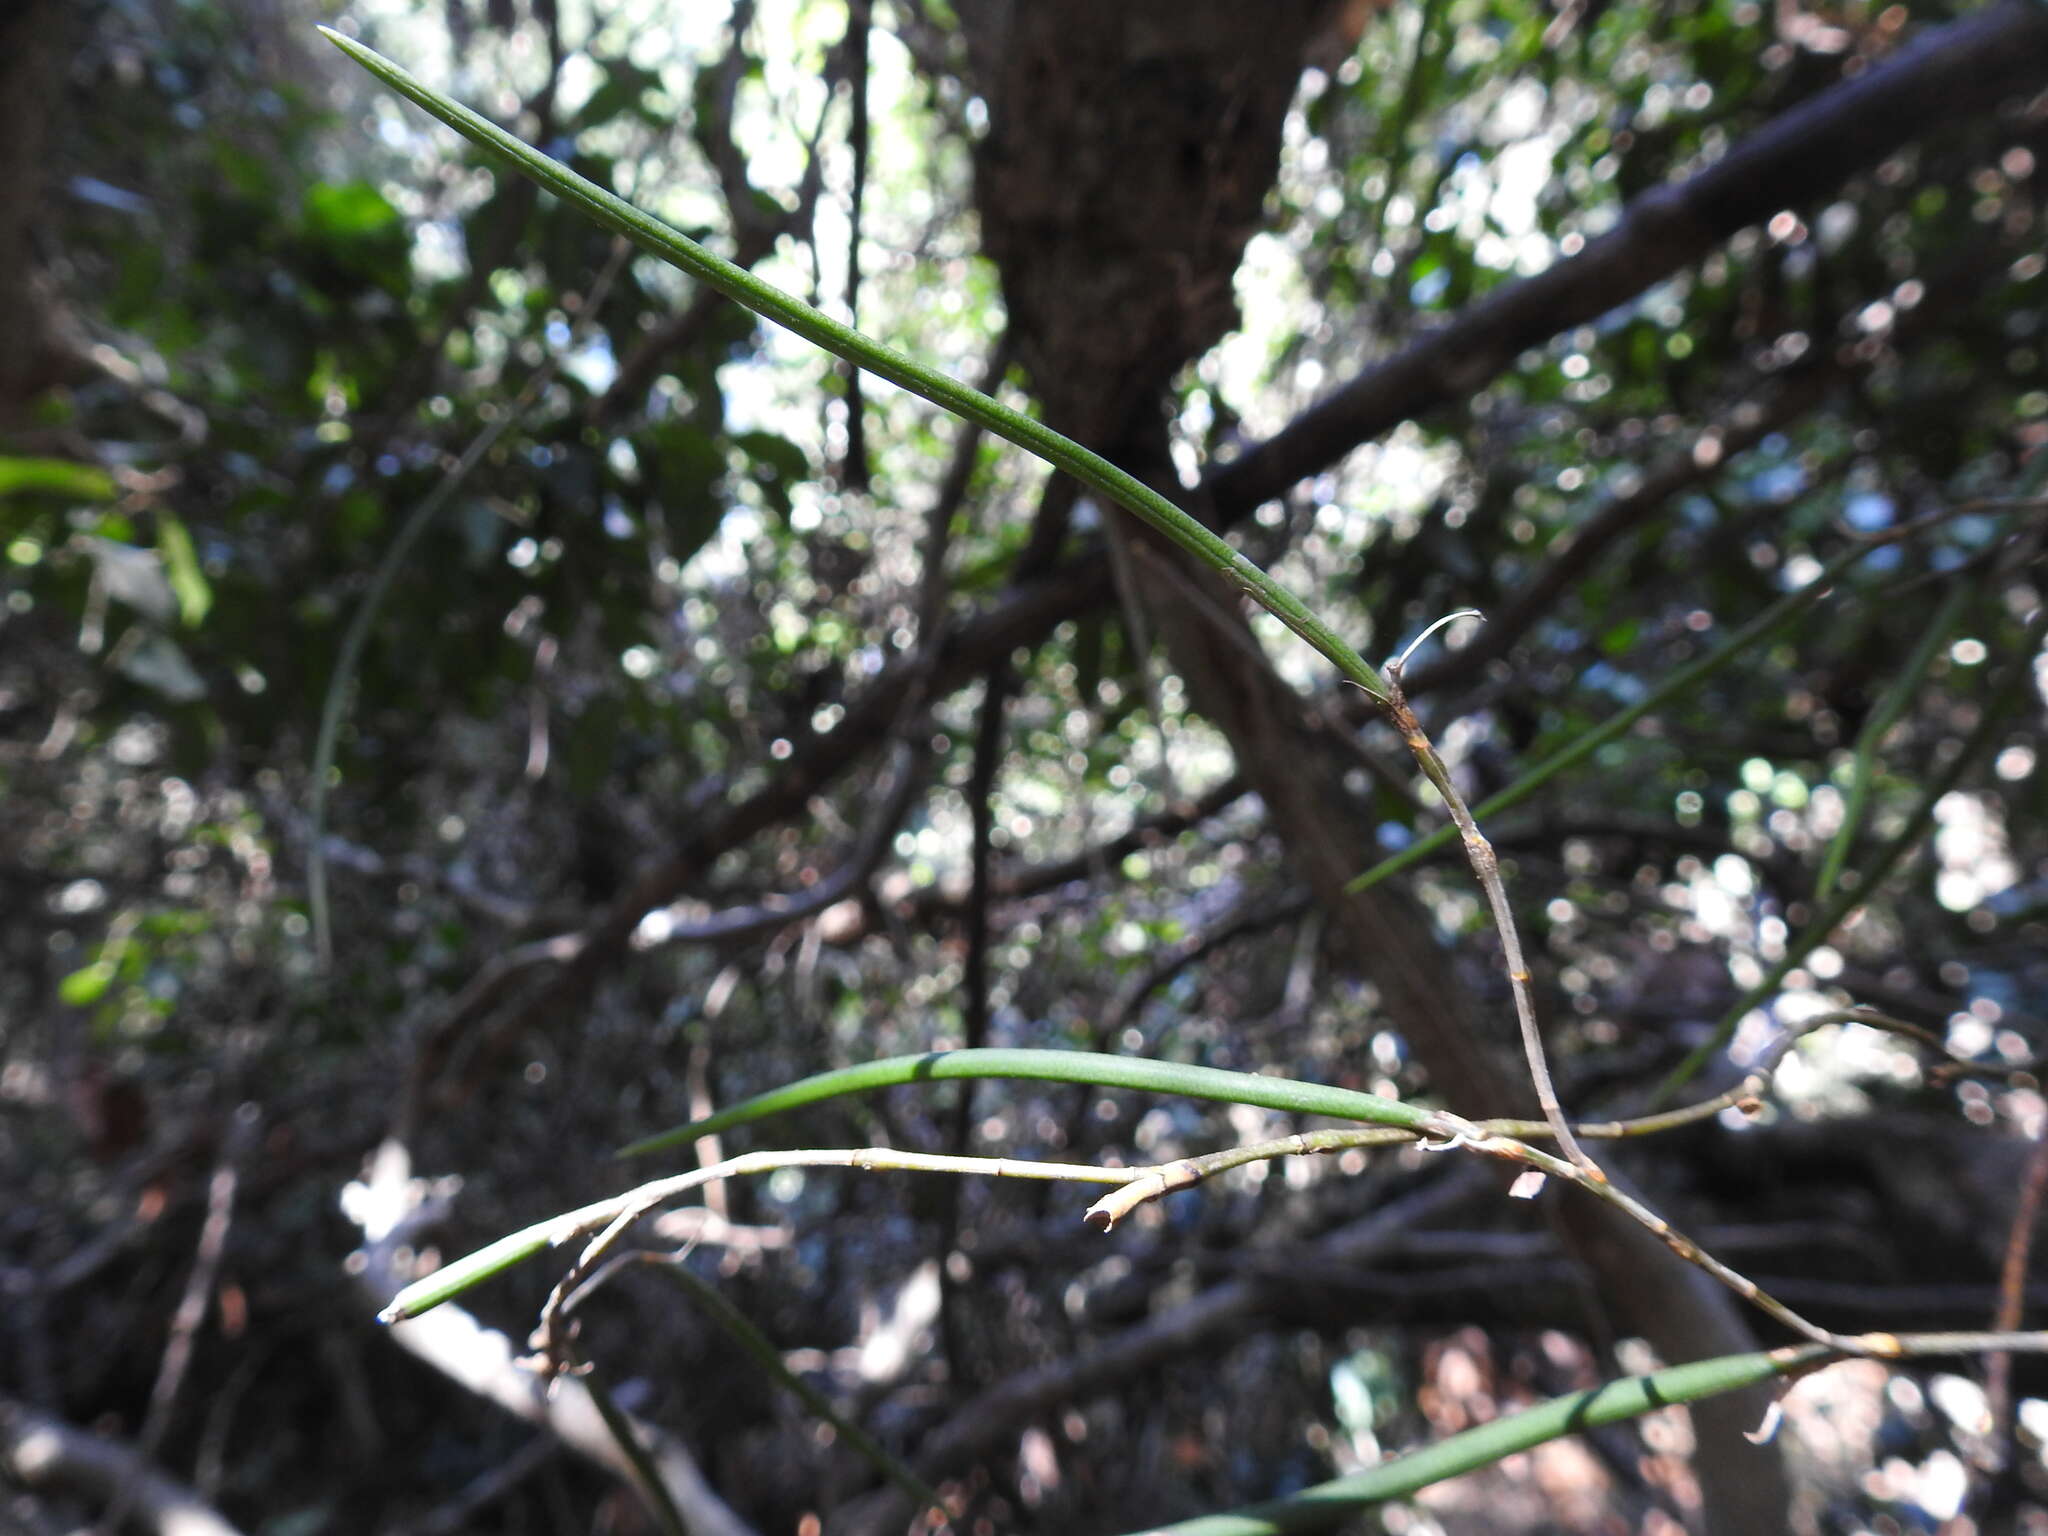 Image of Straggly pencil orchid